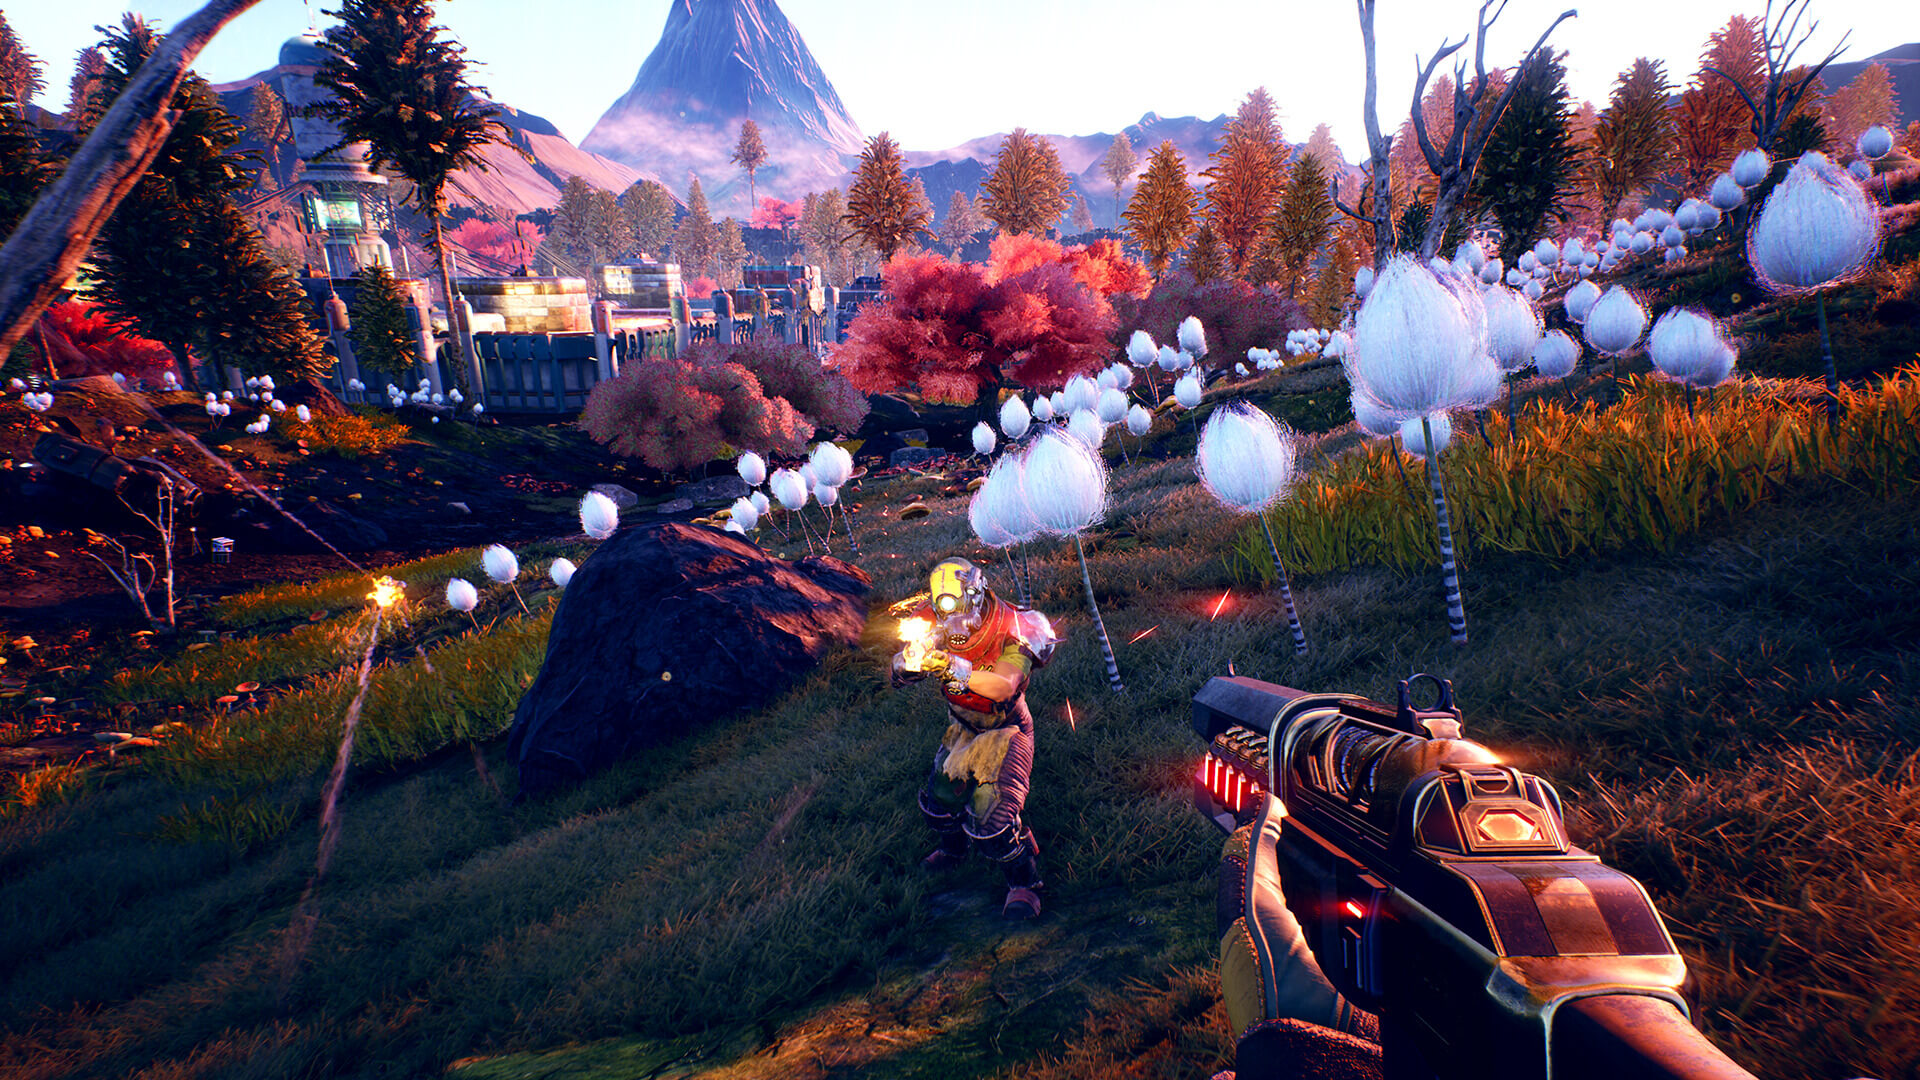 The Outer Worlds isn't a Microsoft game, even though it's buying Obsidian -  Polygon